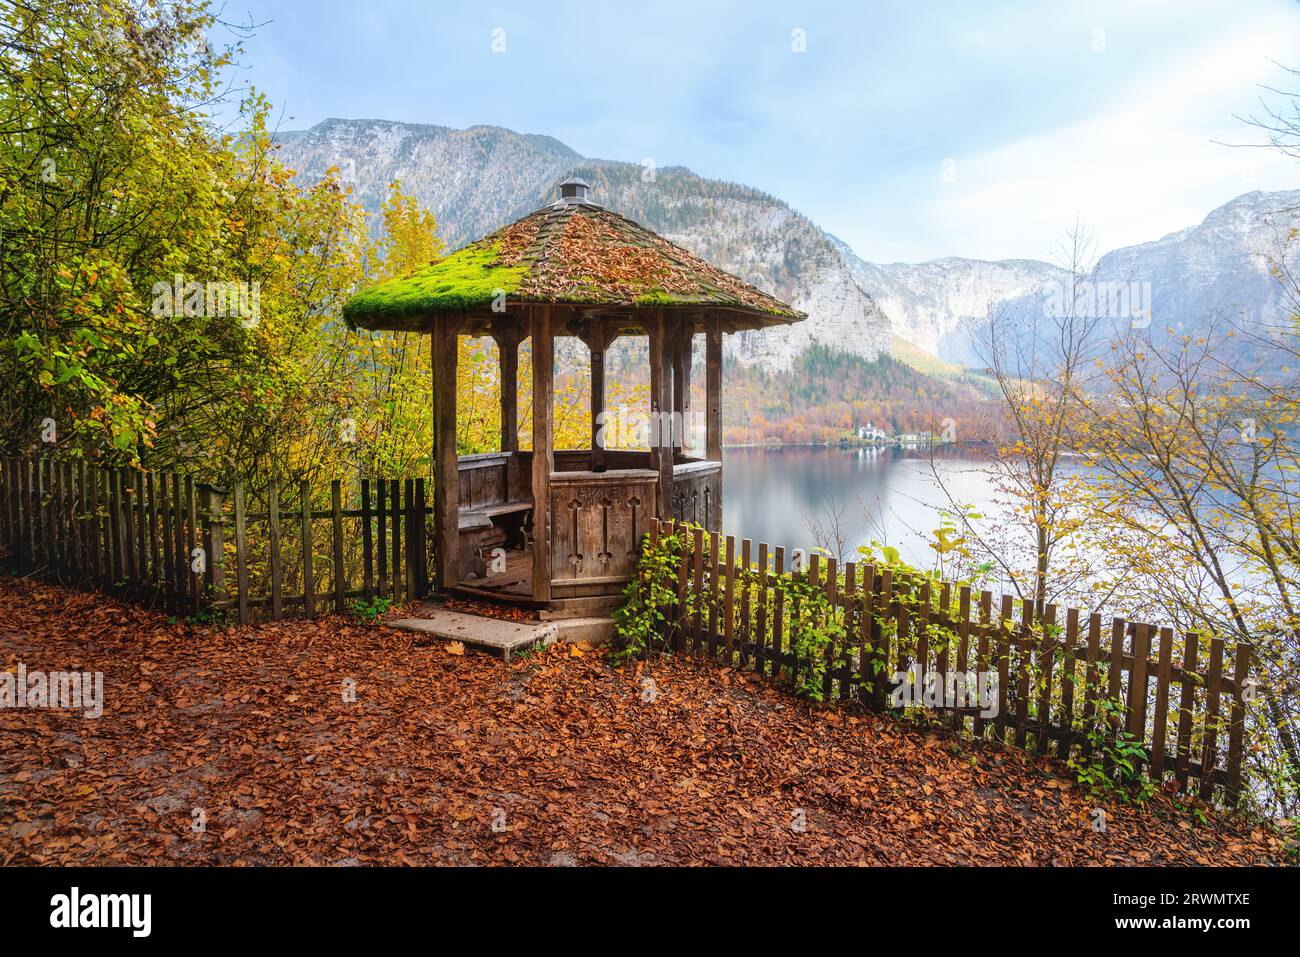 Viewpoint on the Panorama Trail with beautiful wooden gazebo and view of Lake Hallstatt and Alps Mountains - Hallstatt, Austria Stock Photo